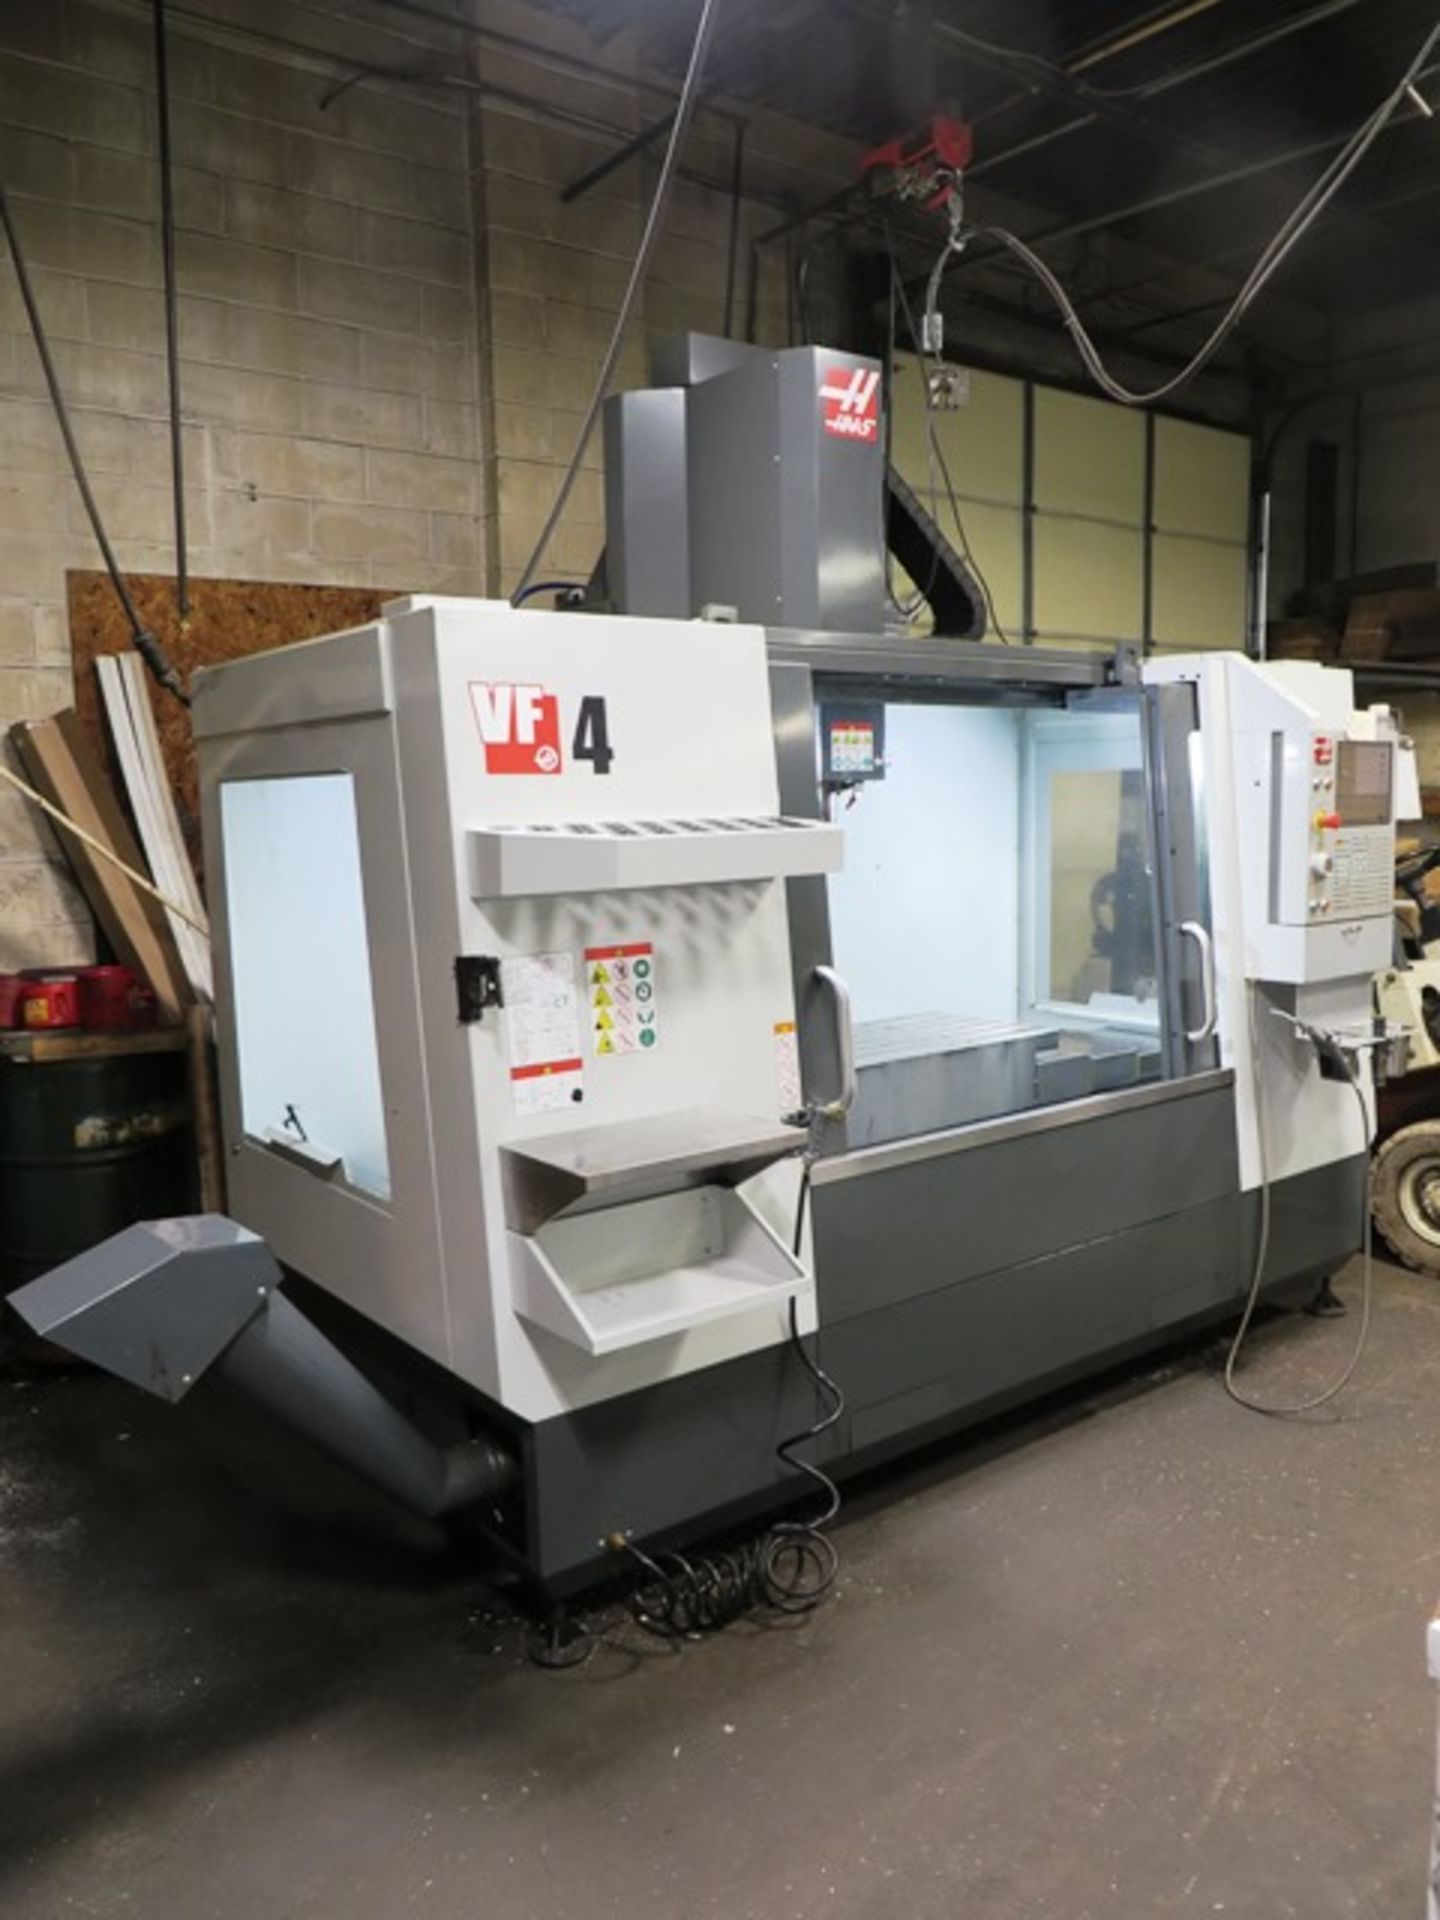 Haas VF-4 3-Axis CNC Vertical Machining Center - Image 6 of 7